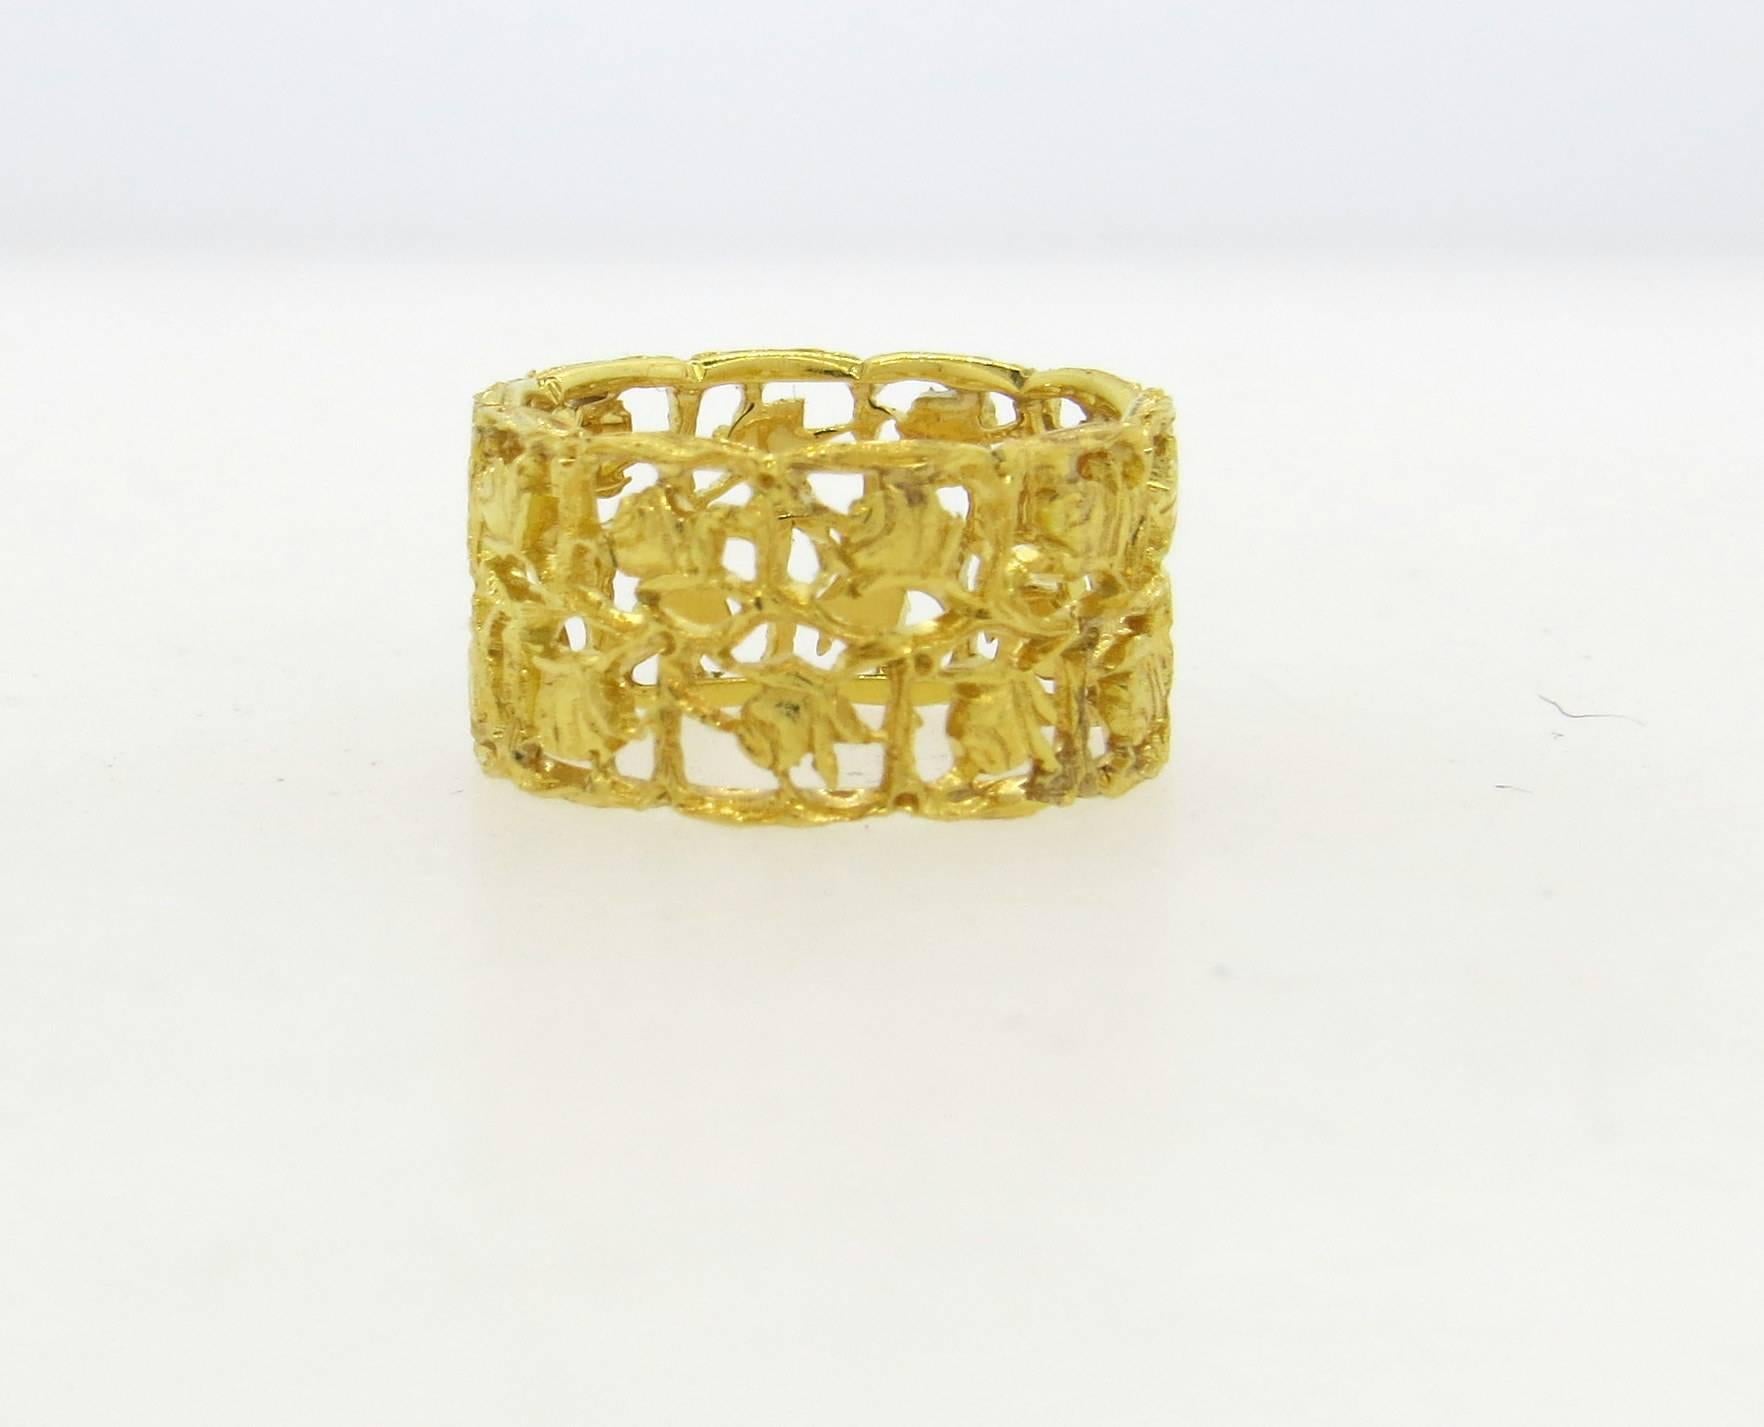 Wide 18k yellow gold floral motif ring, crafted by Buccellati. Ring is a size 5 1/2, ring is 9.8mm wide. Marked: Buccellati Italy 18k. Weight of the piece - 5.1 grams 
Comes with original Buccellati paperwork